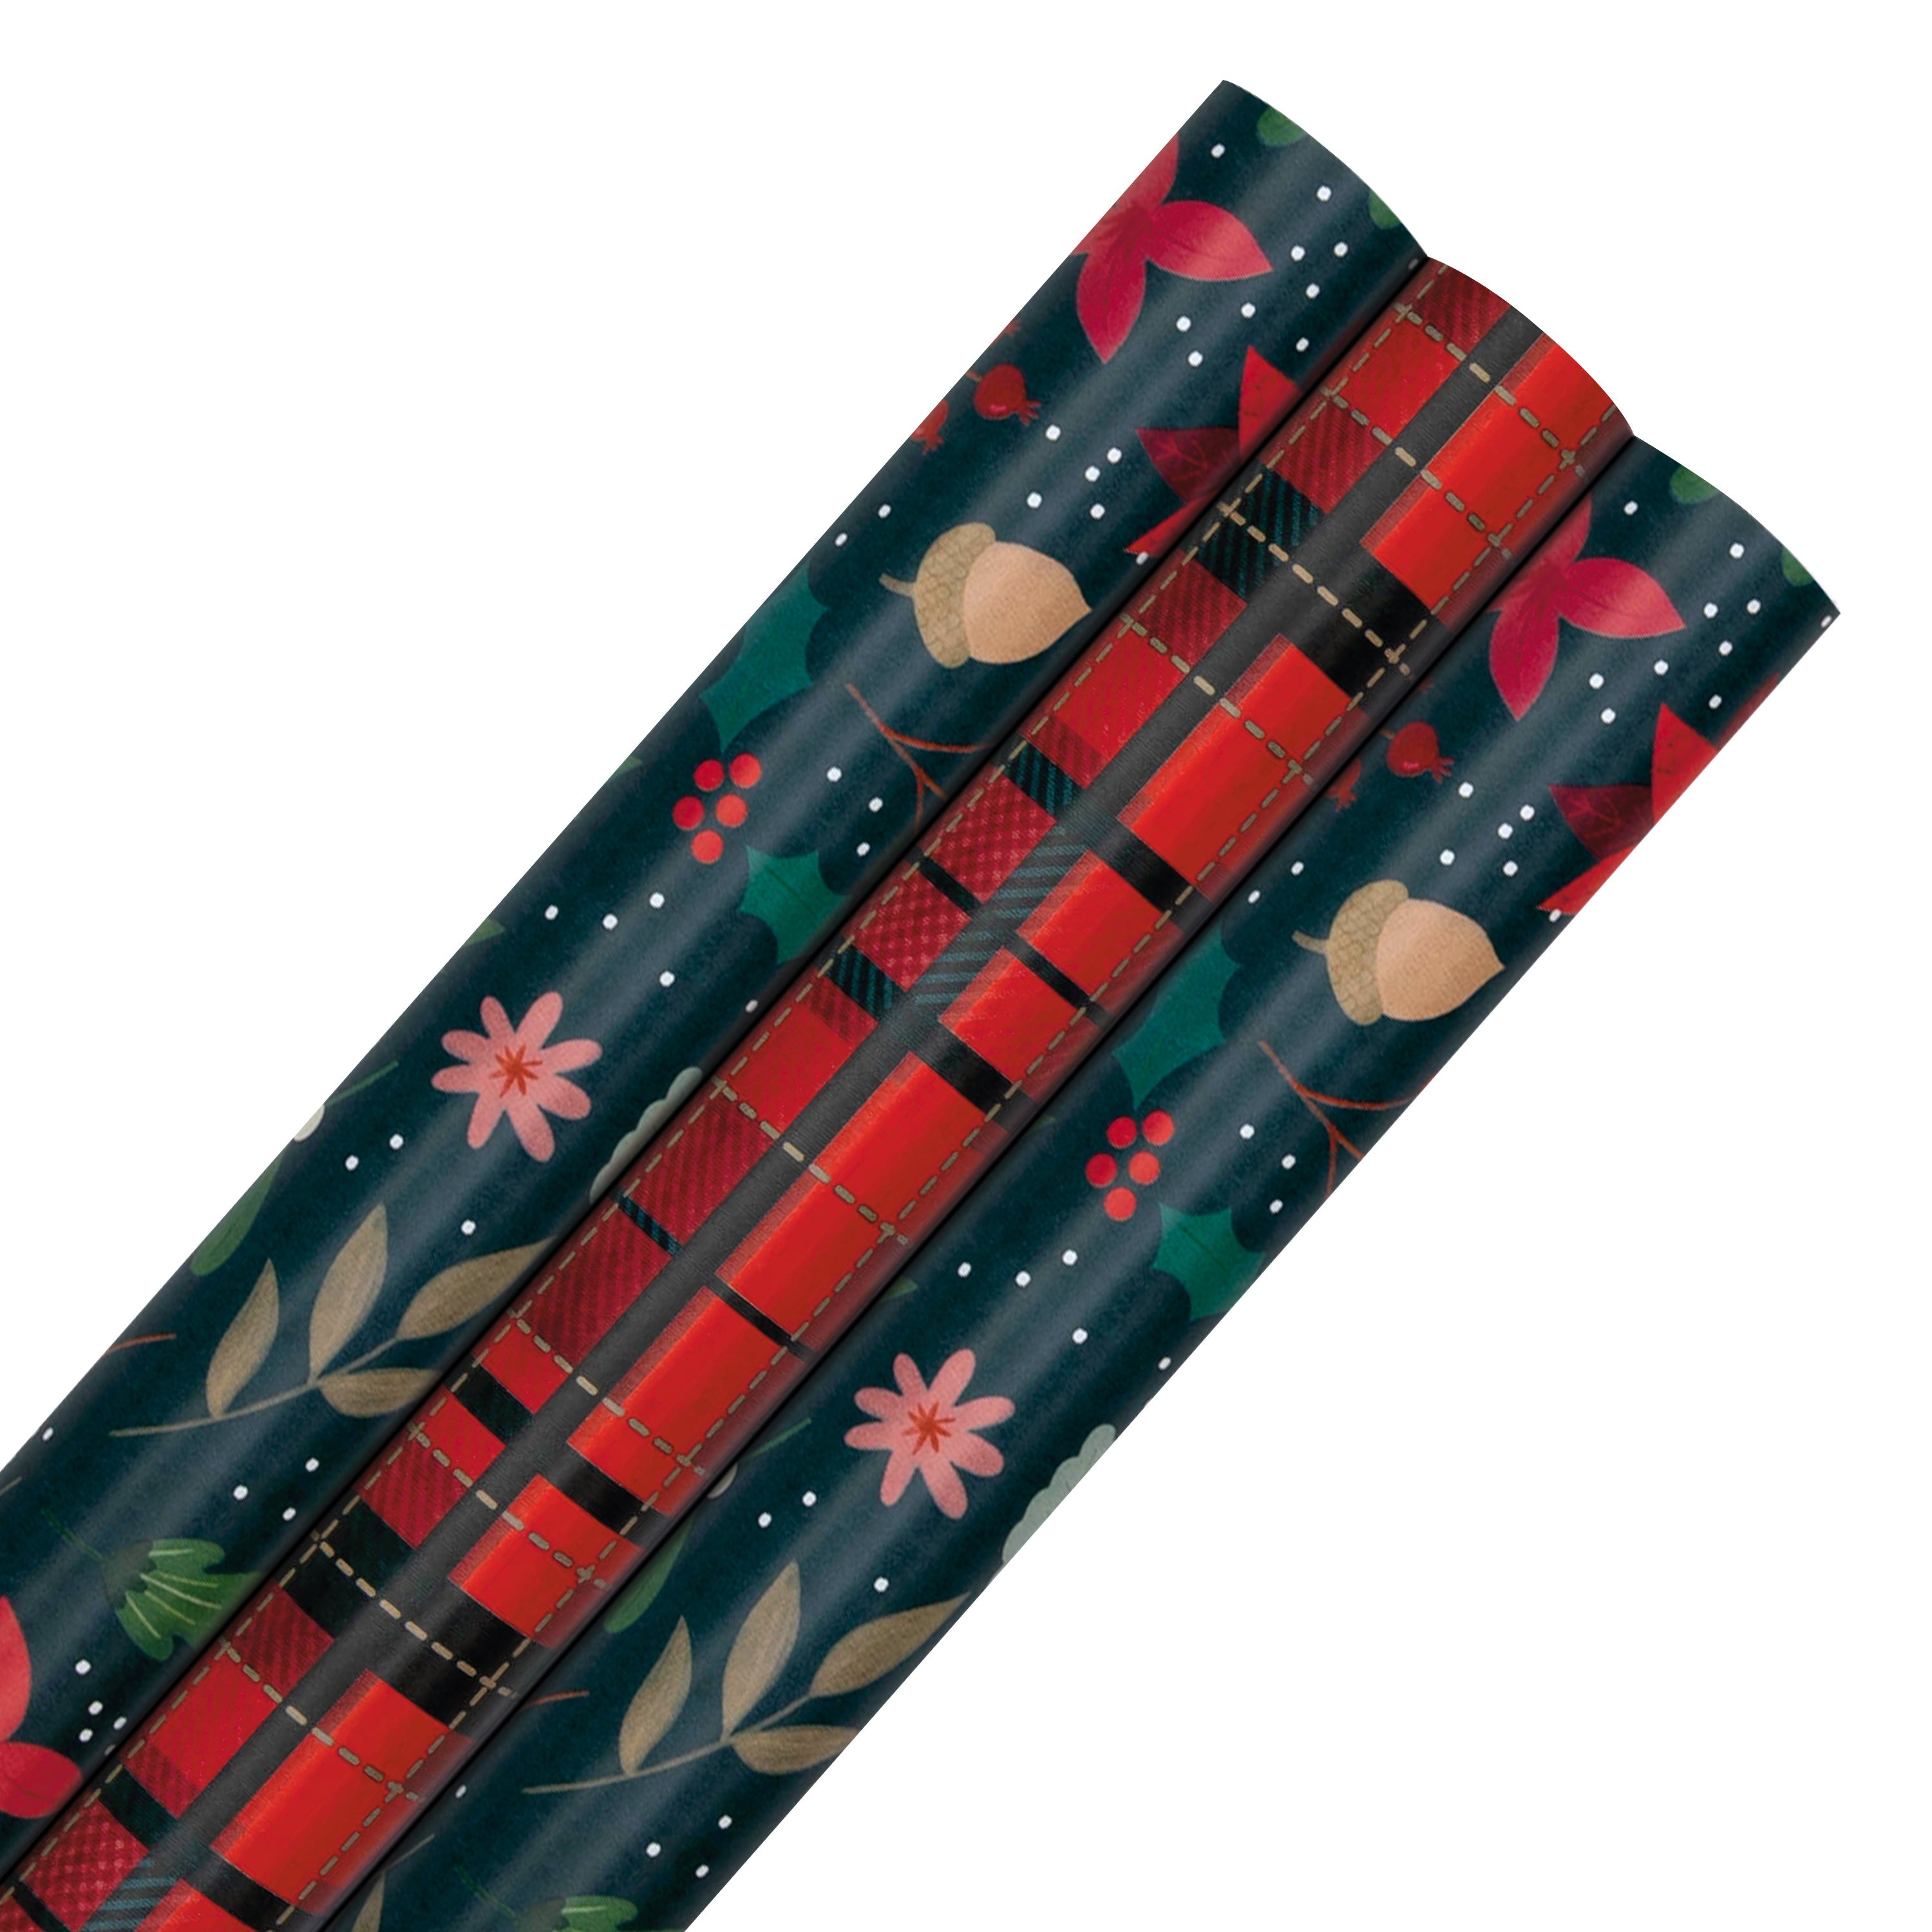 Black wrapping paper.  Colorful gift wrapping, Christmas gift